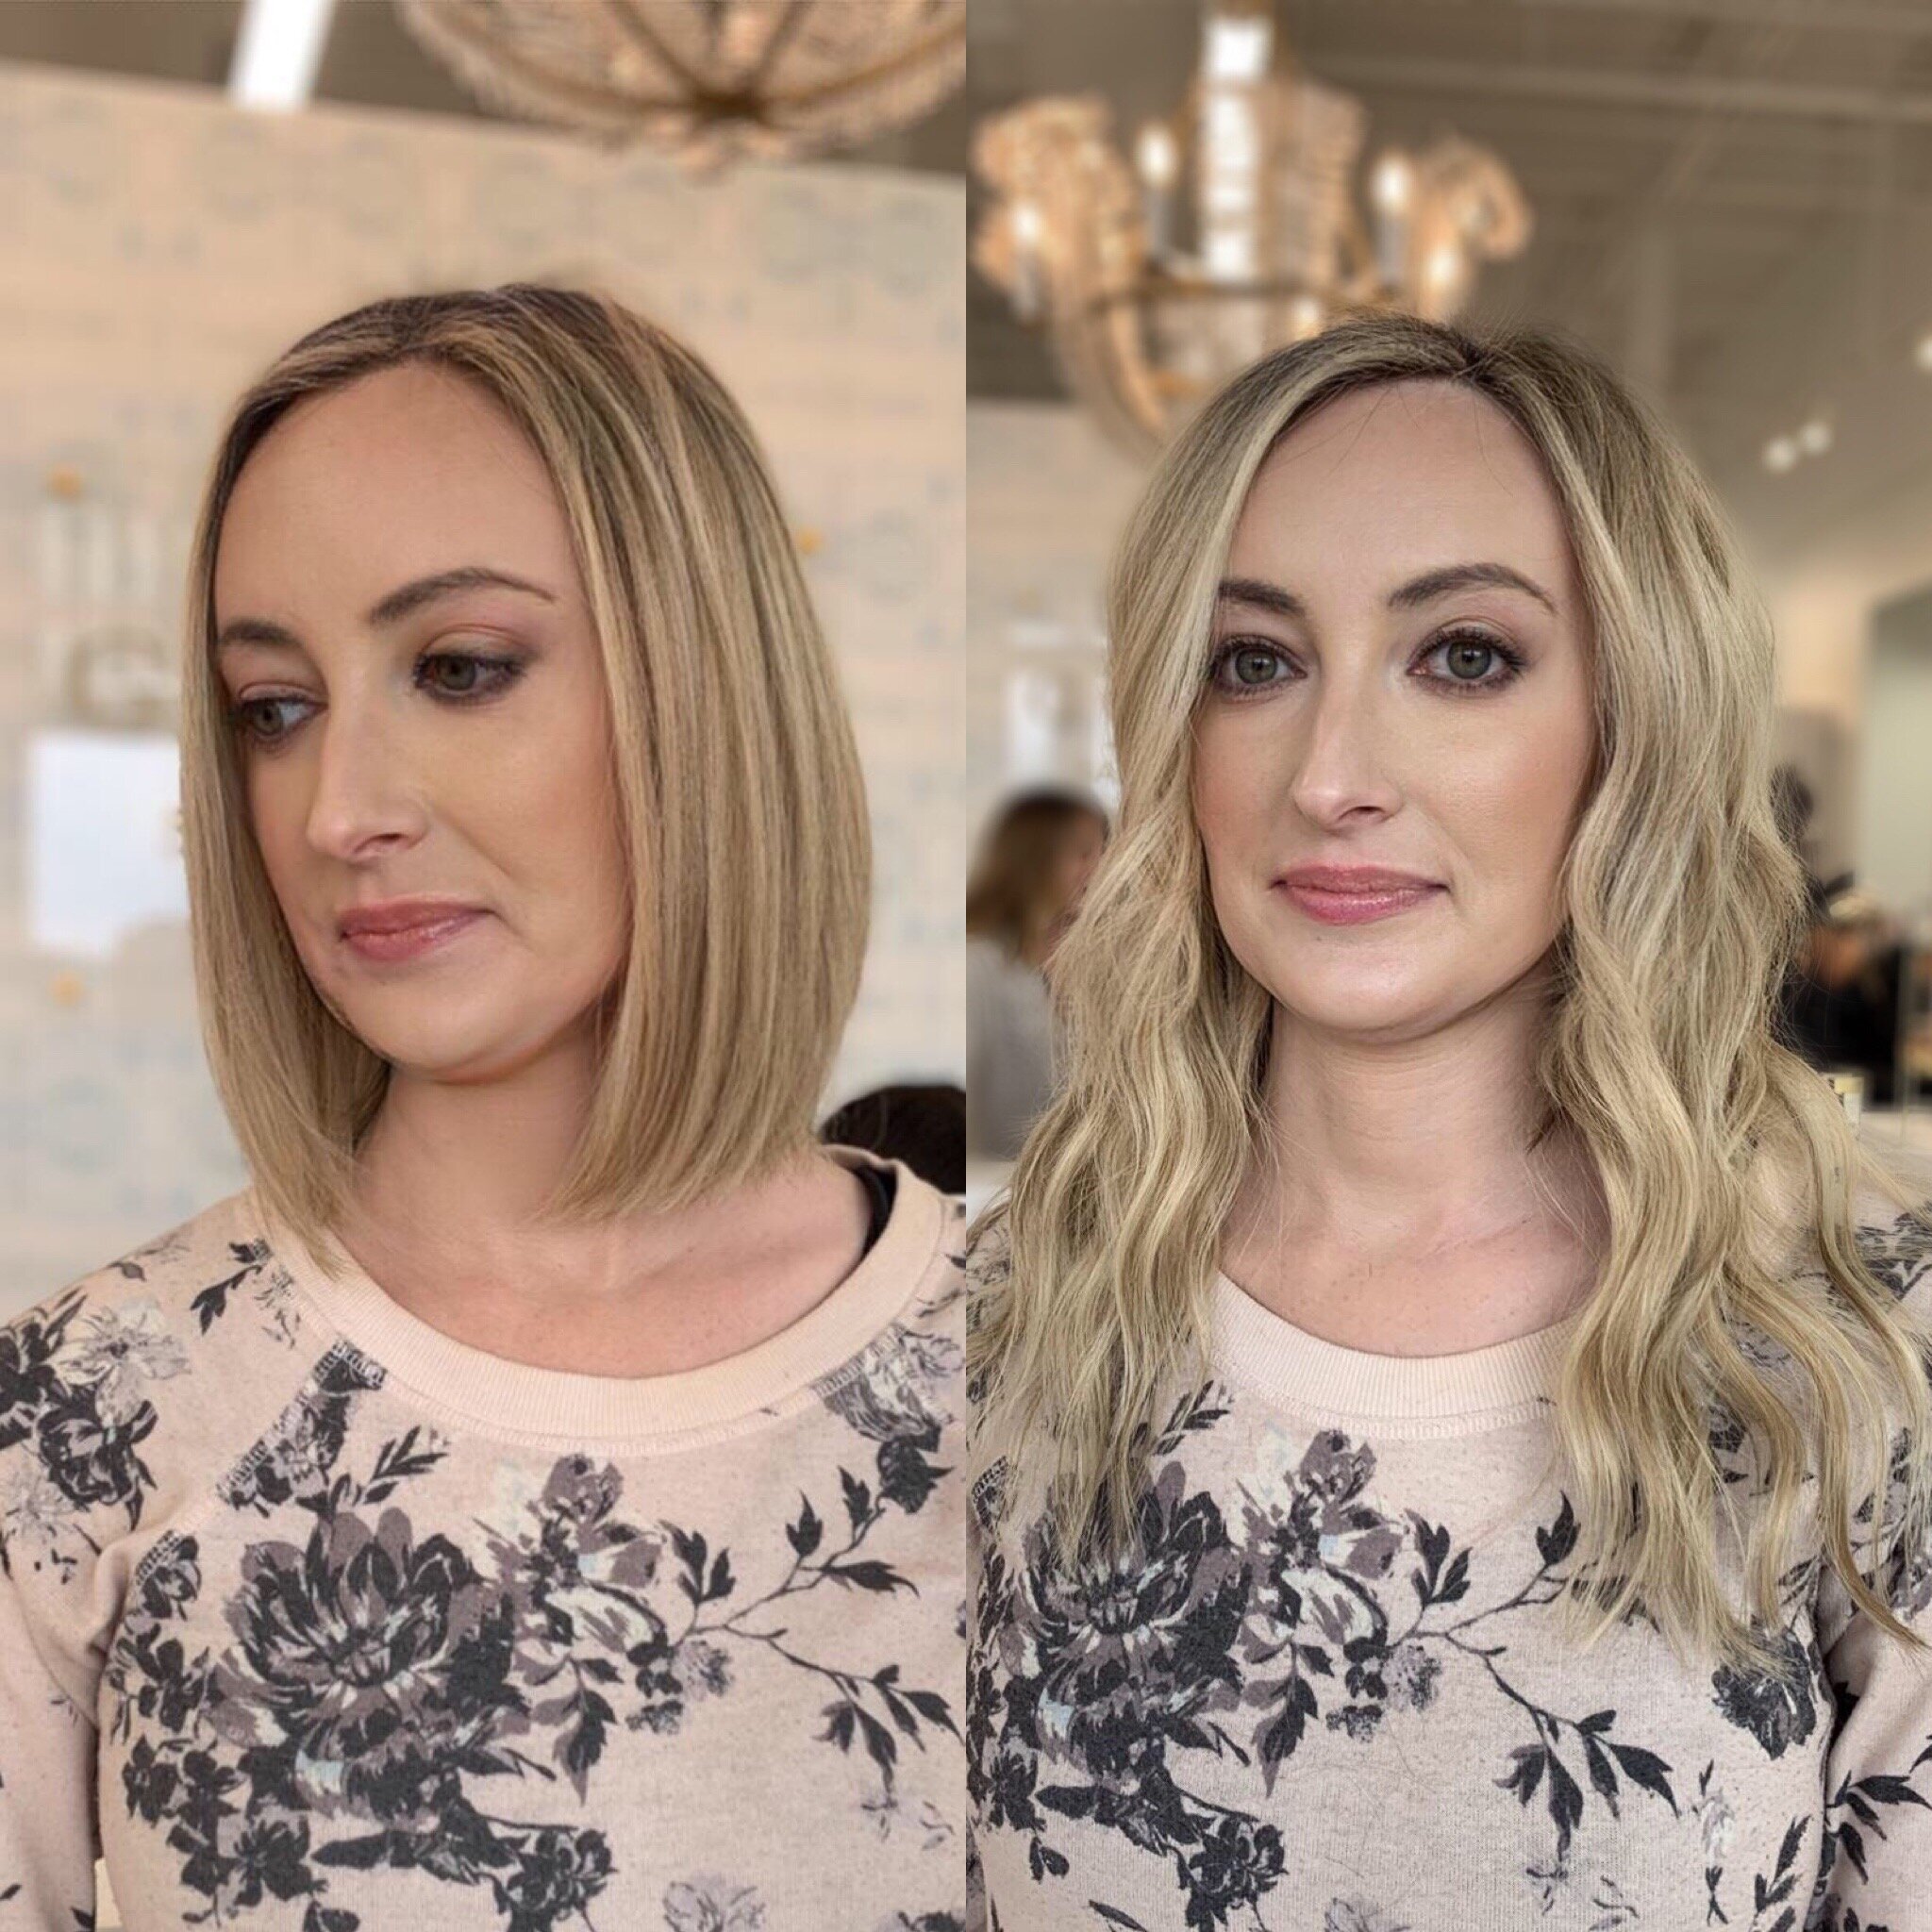 Gallery — Hair by Lori Smith